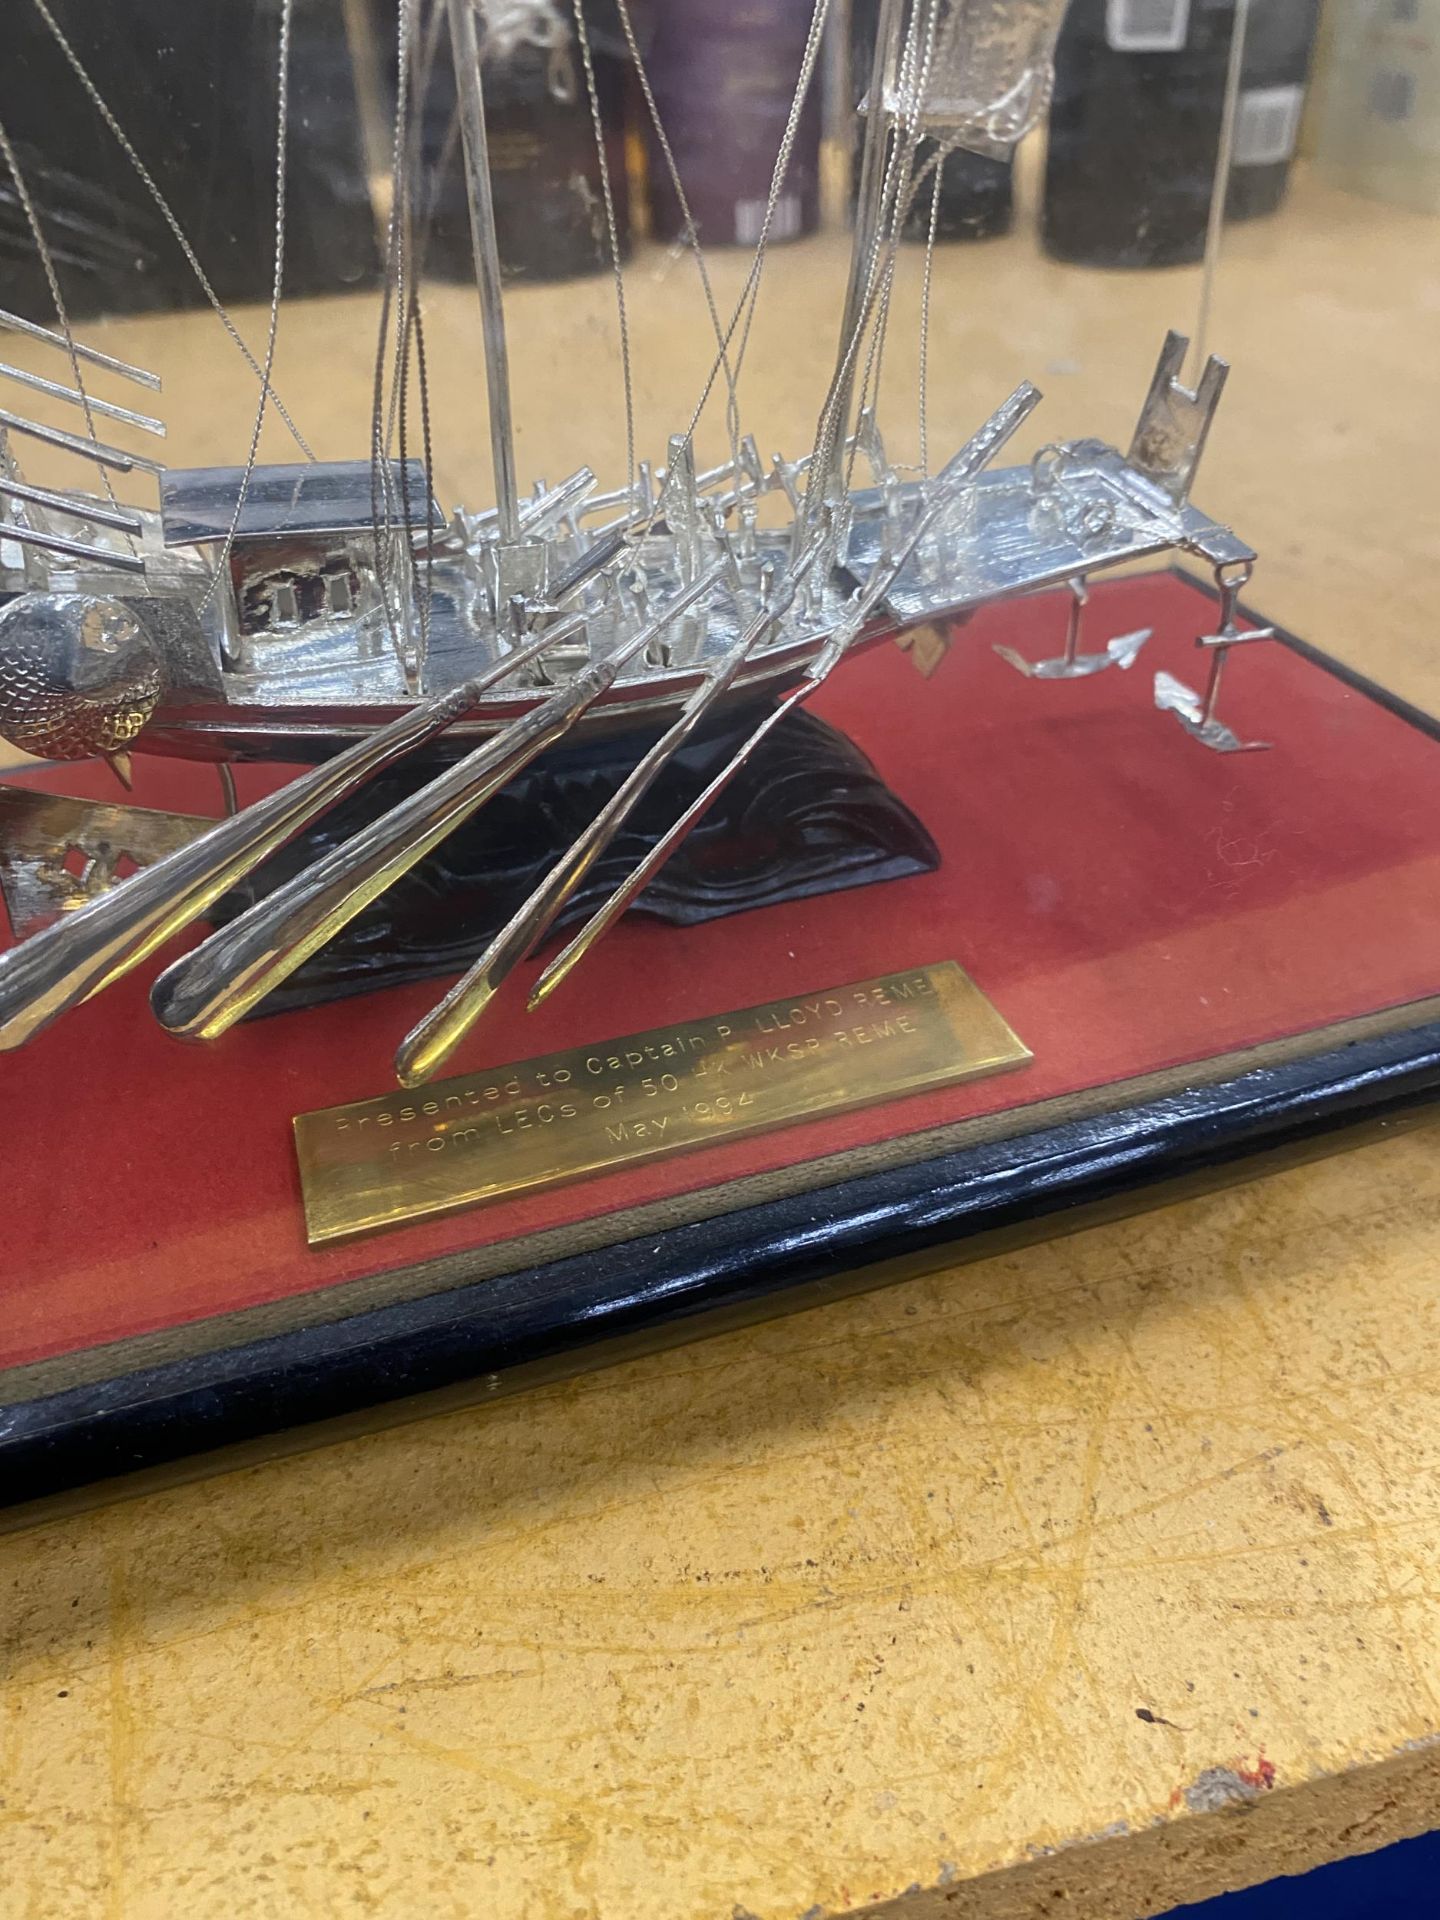 A PRESENTATION SILVER EFFECT WHITE METAL MODEL OF A BOAT IN A GLASS DISPLAY CASE - Image 3 of 3